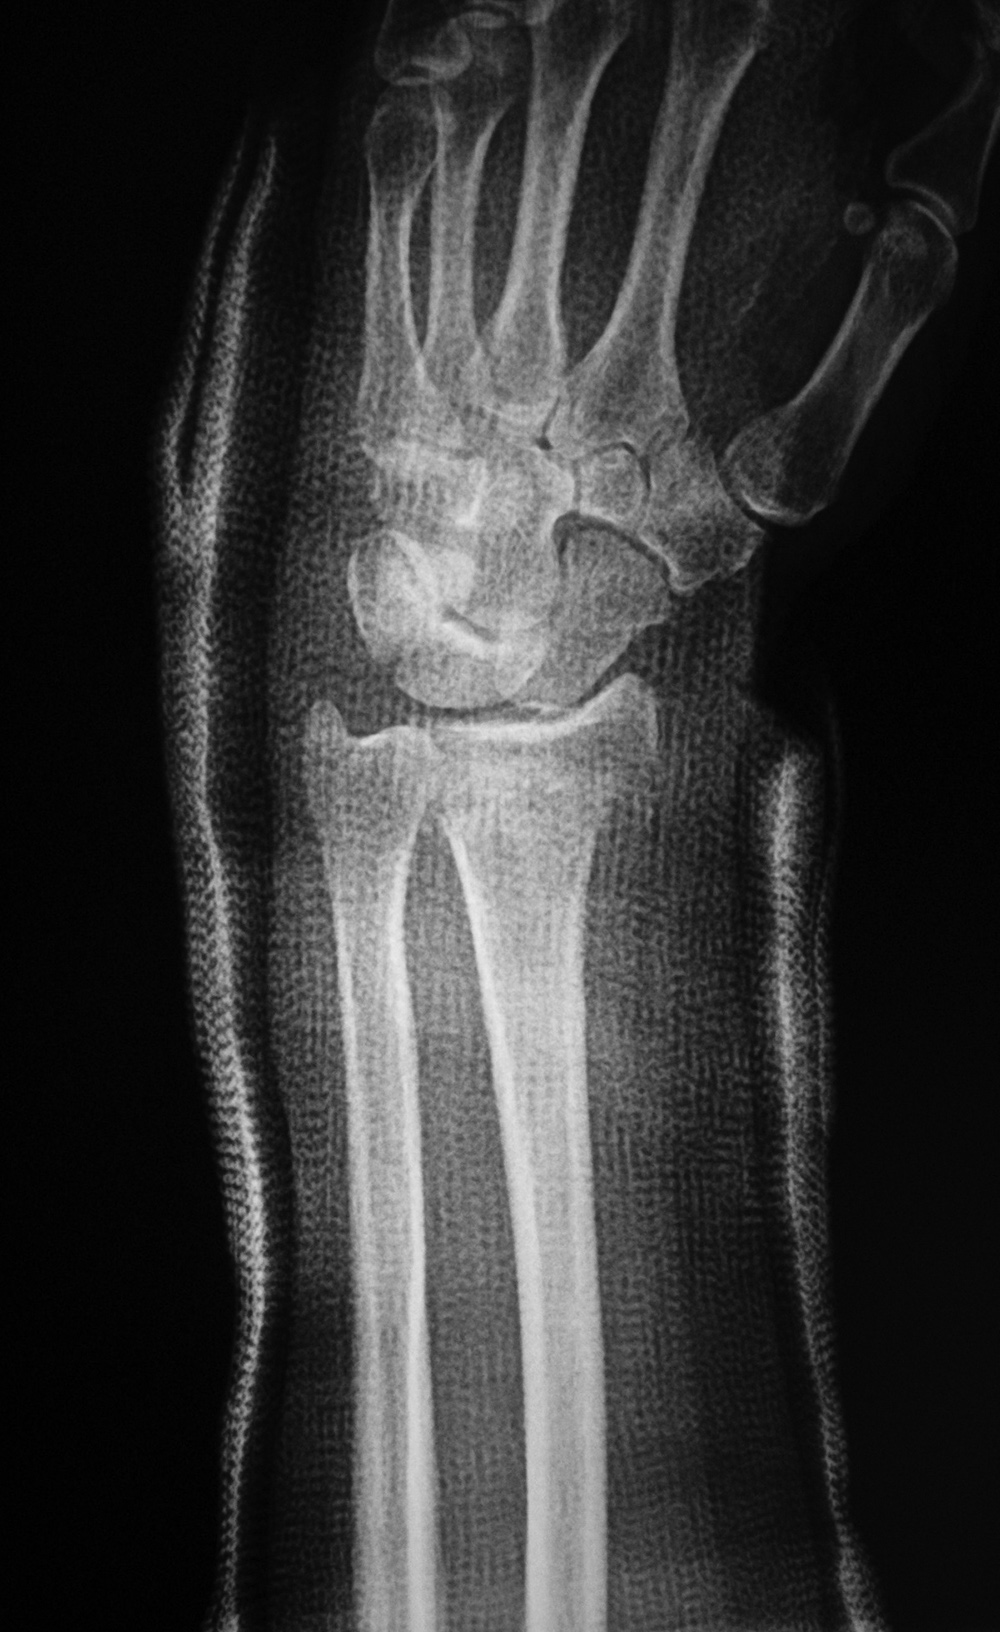 Fracture Fixation: a gallery